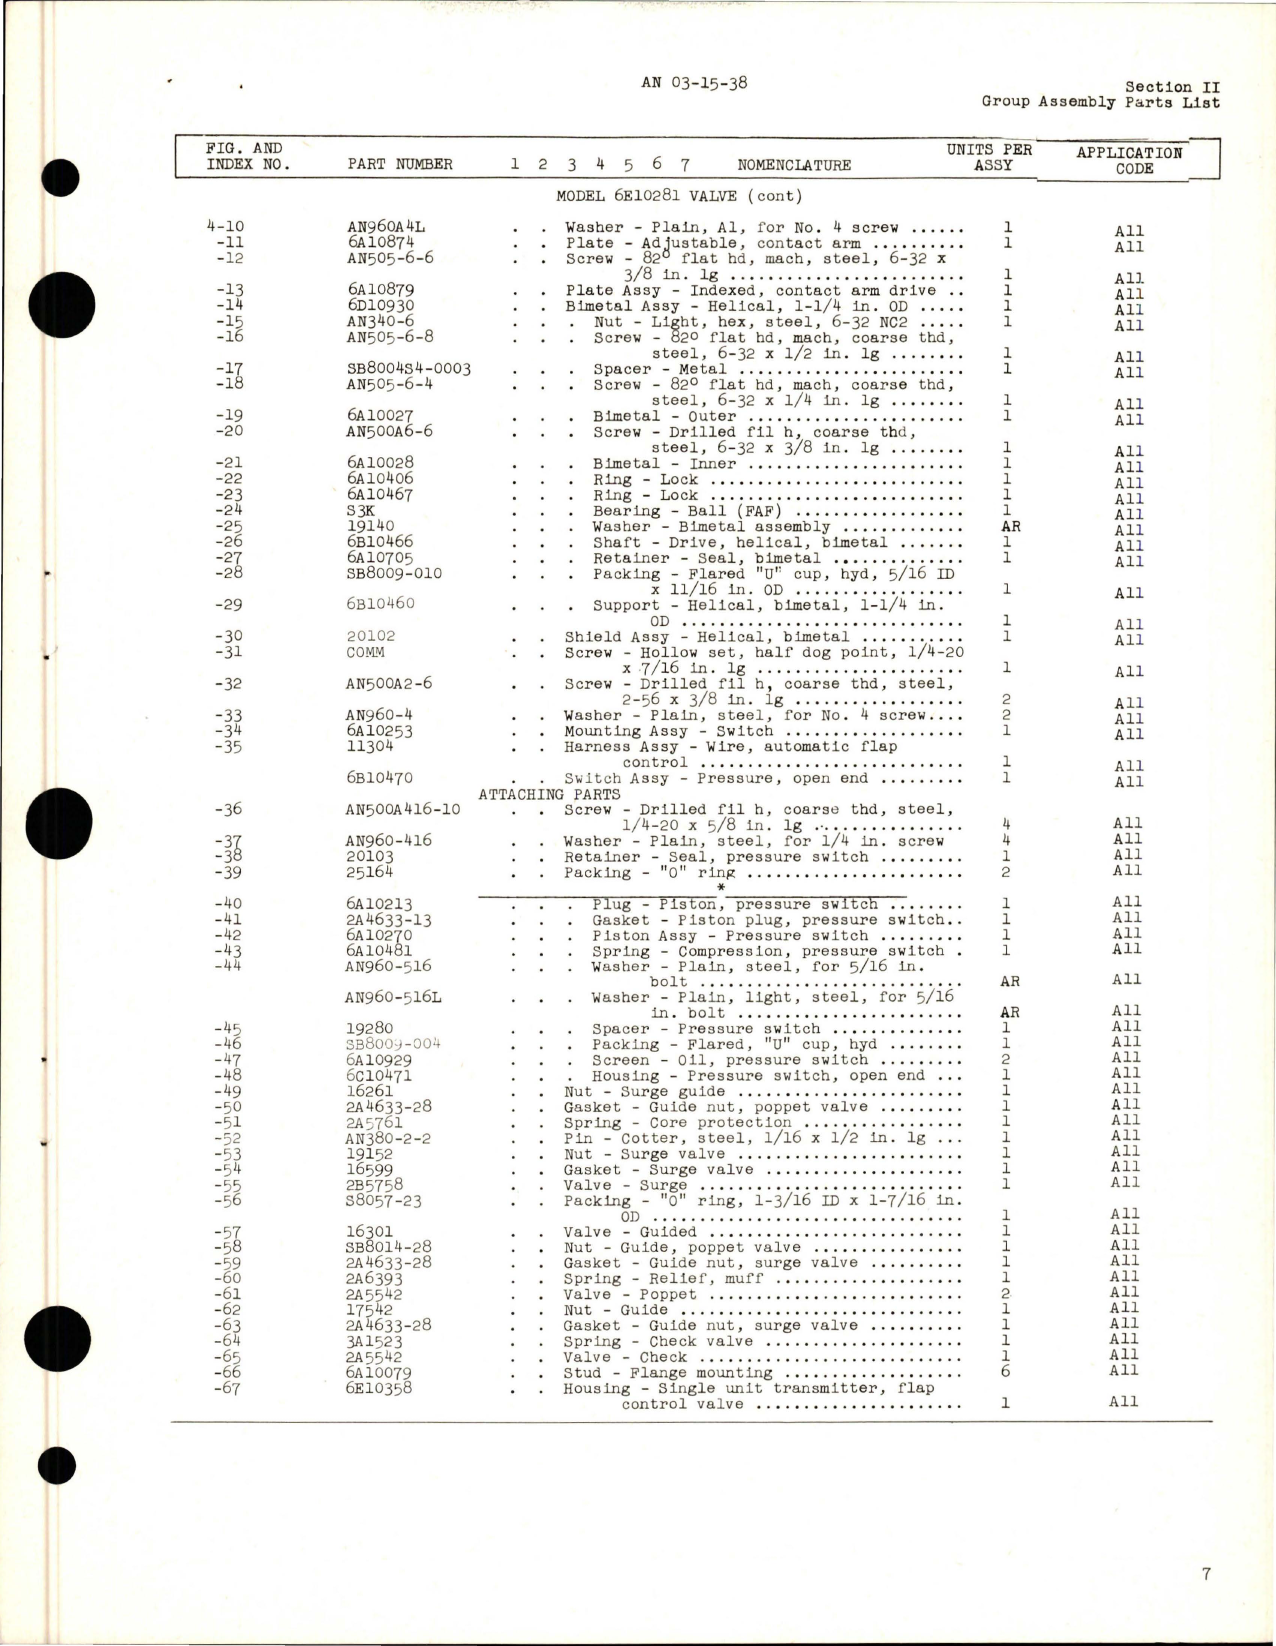 Sample page 9 from AirCorps Library document: Parts Catalog for Oil Temperature Regulators - Oil Coolers - Valves